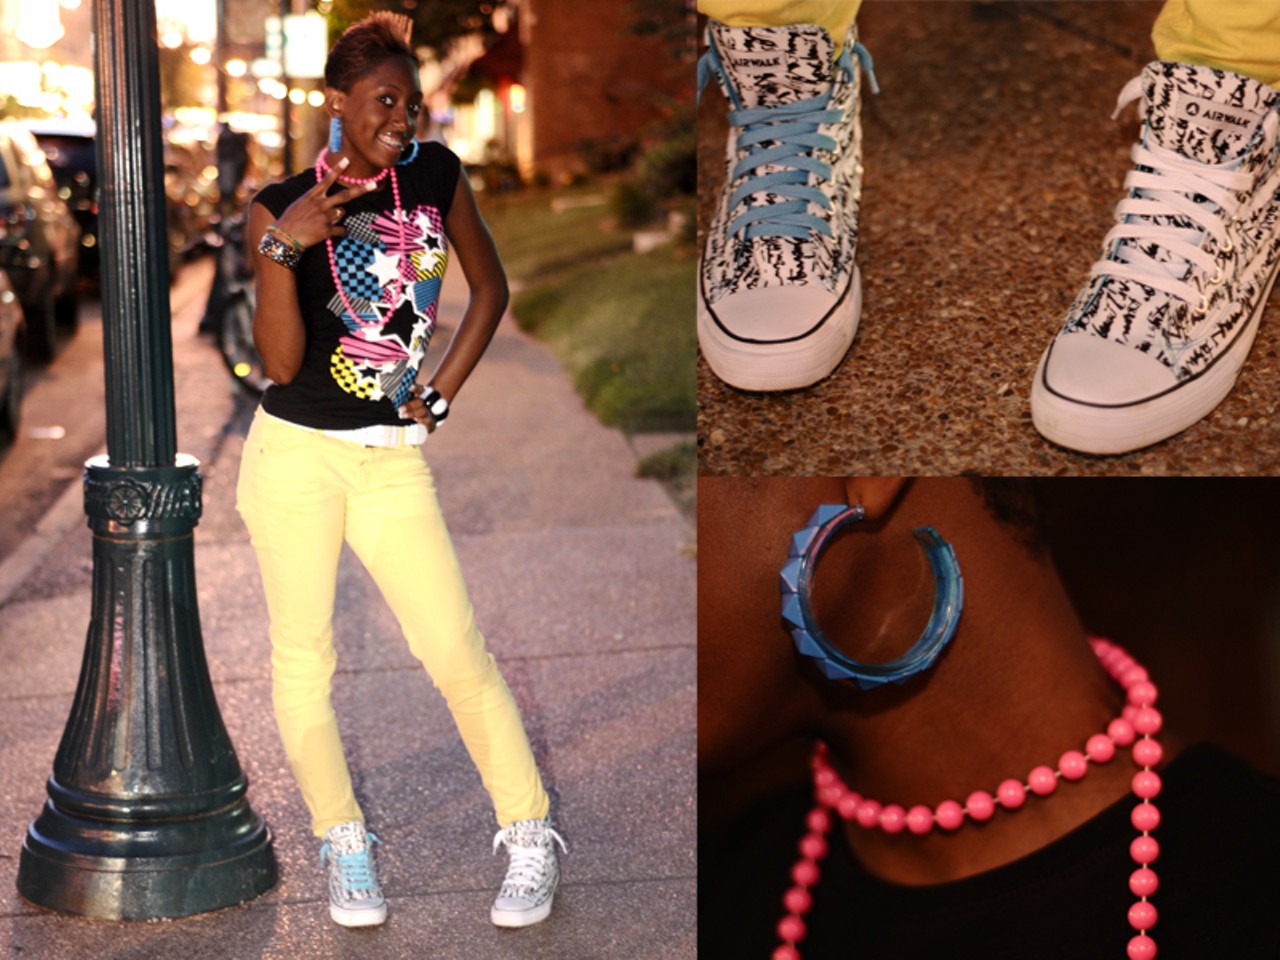 Jalinda, 14, Normandy
"I'm gonna wear a really hot green."
Wearing every color in the rainbow, and accessories to match the primary explosion, Jalinda was riding the U. City rainbow lion on Delmar. 
Why different-colored shoelaces?
"Because it went with my shirt." Despite only being able to see black and white on her hightops, Jalinda referenced the blue in them as reasoning for the different laces as well.
Earrings and pearls?
Like the shoelaces, Jalinda is wearing an accessory of every color to match the riot of hues seen on her shirt.
What Do You Expect For Fall Fashions?
"More of a splash of colors."